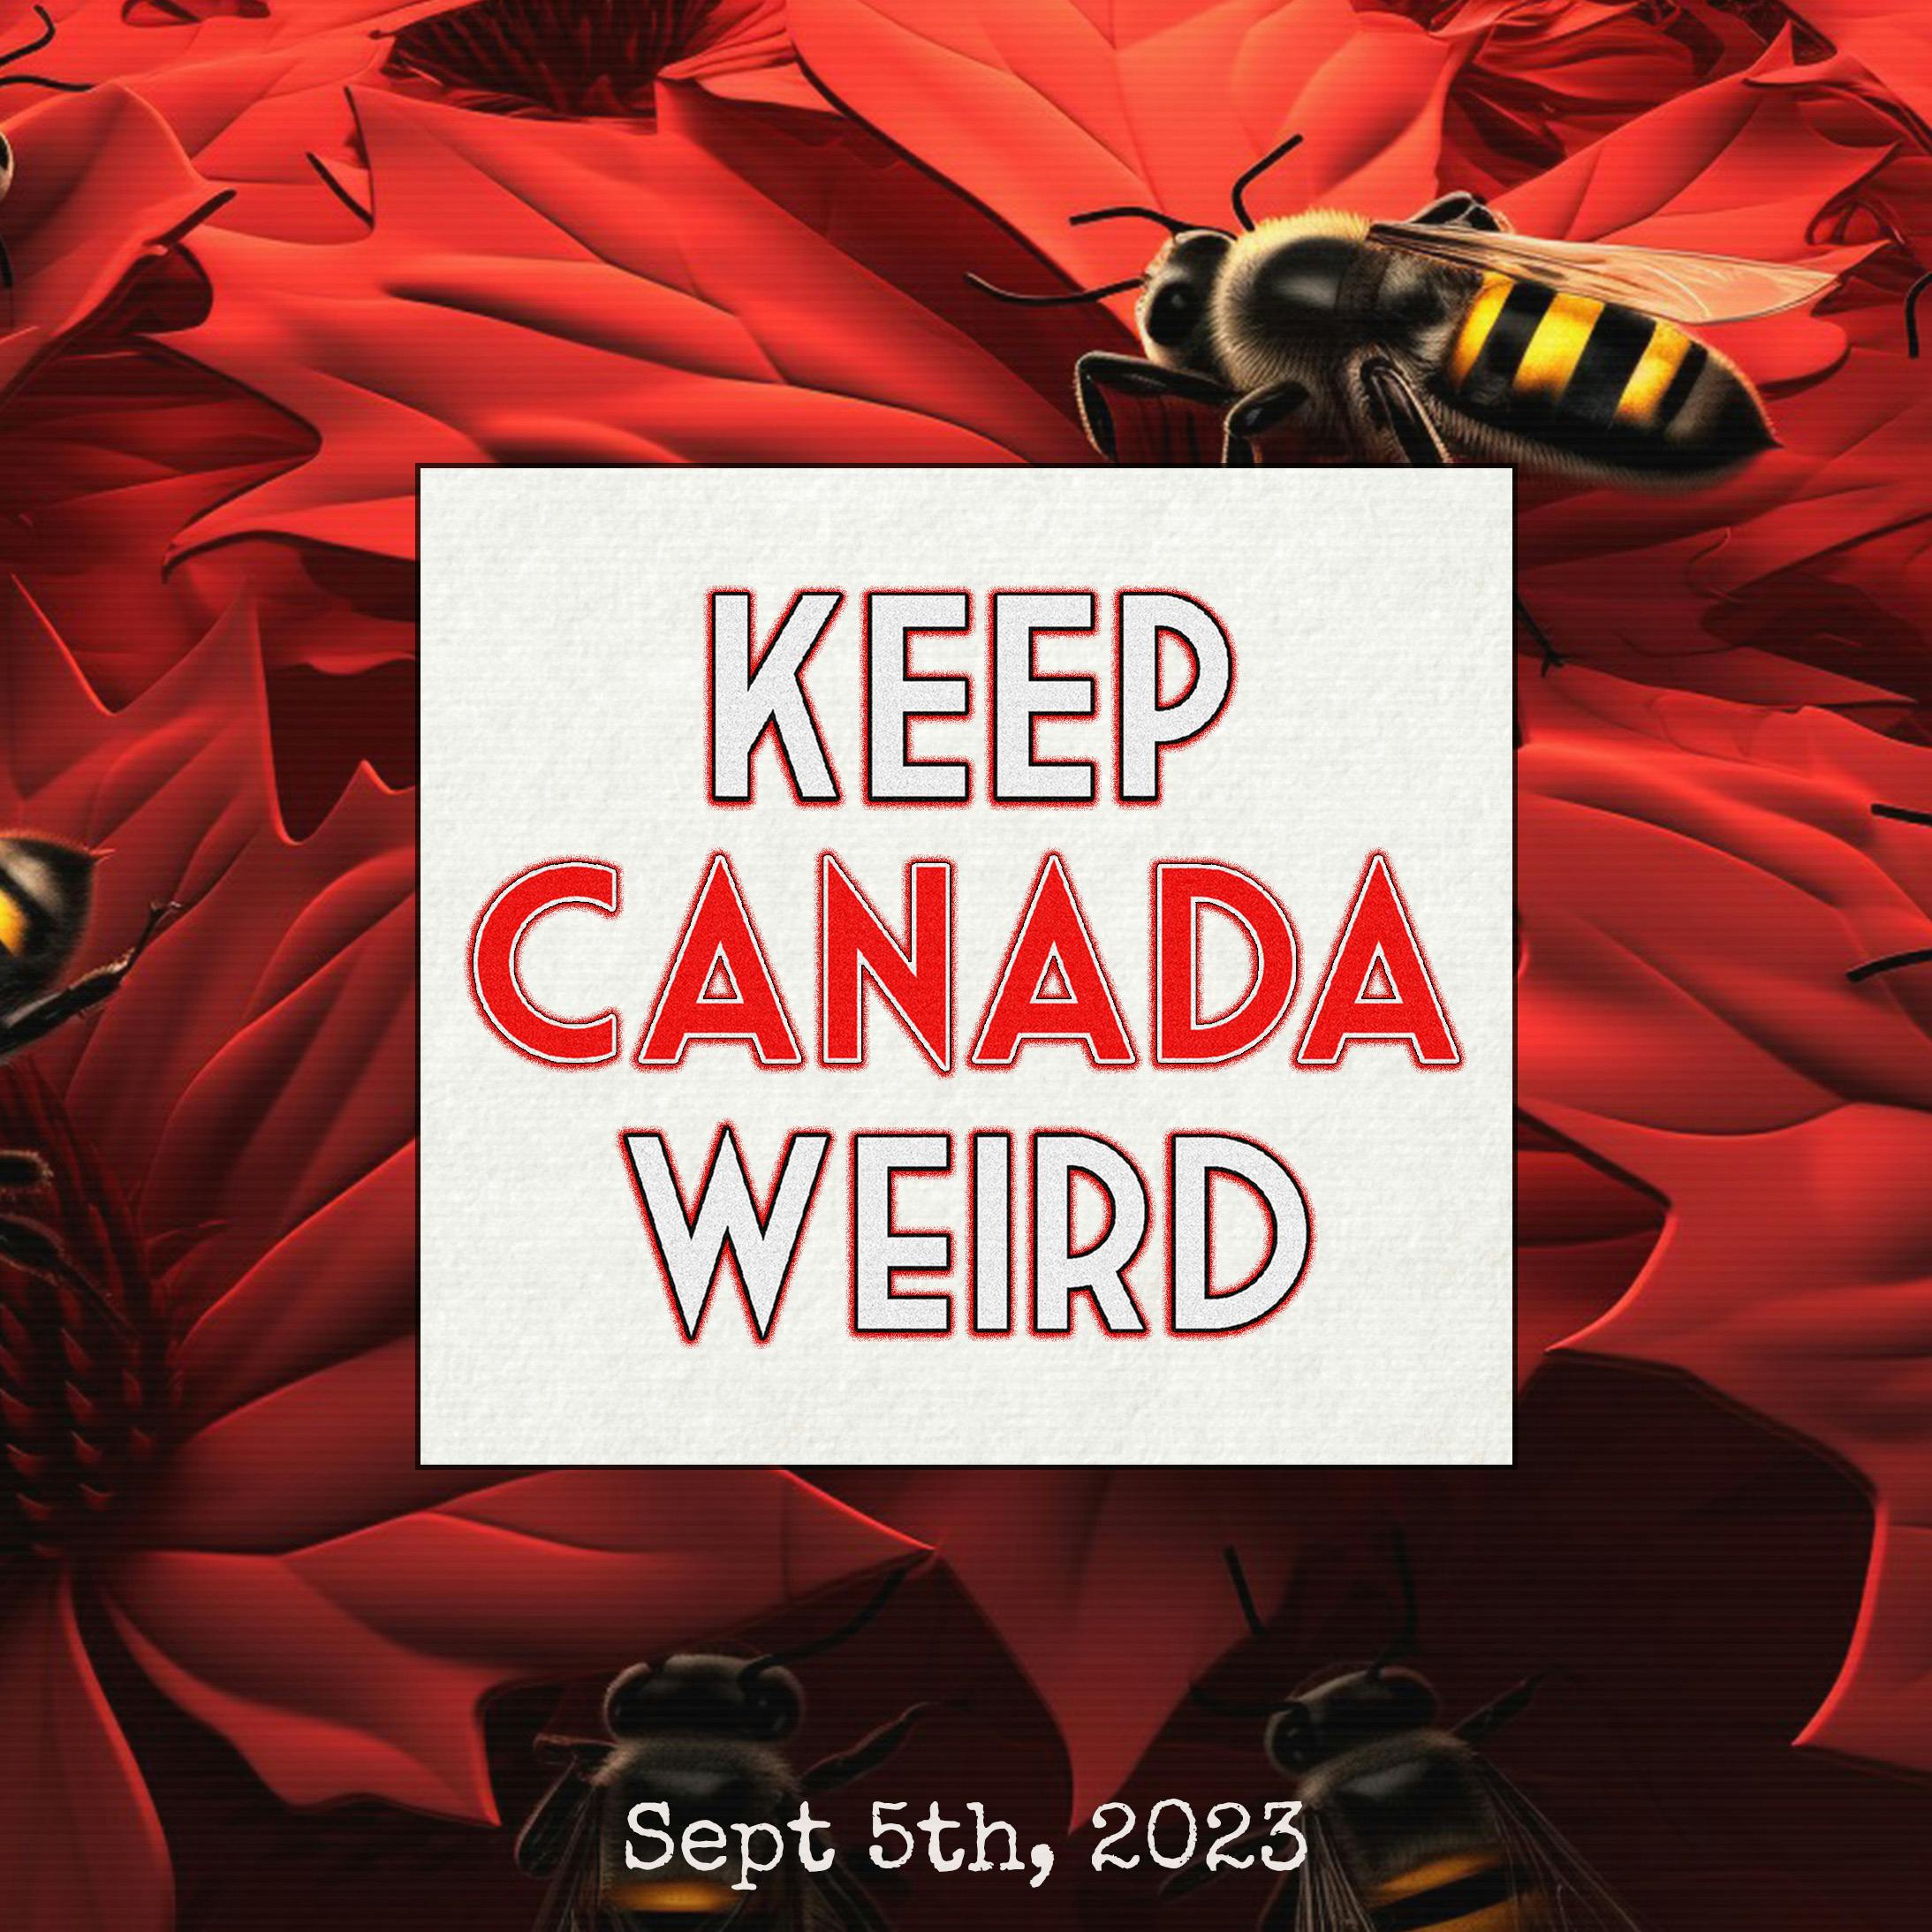 KEEP CANADA WEIRD - Sept 5th, 2023 - Bees in Burlington, the world's biggest arrow, a rocket launcher, and the worst neighbor